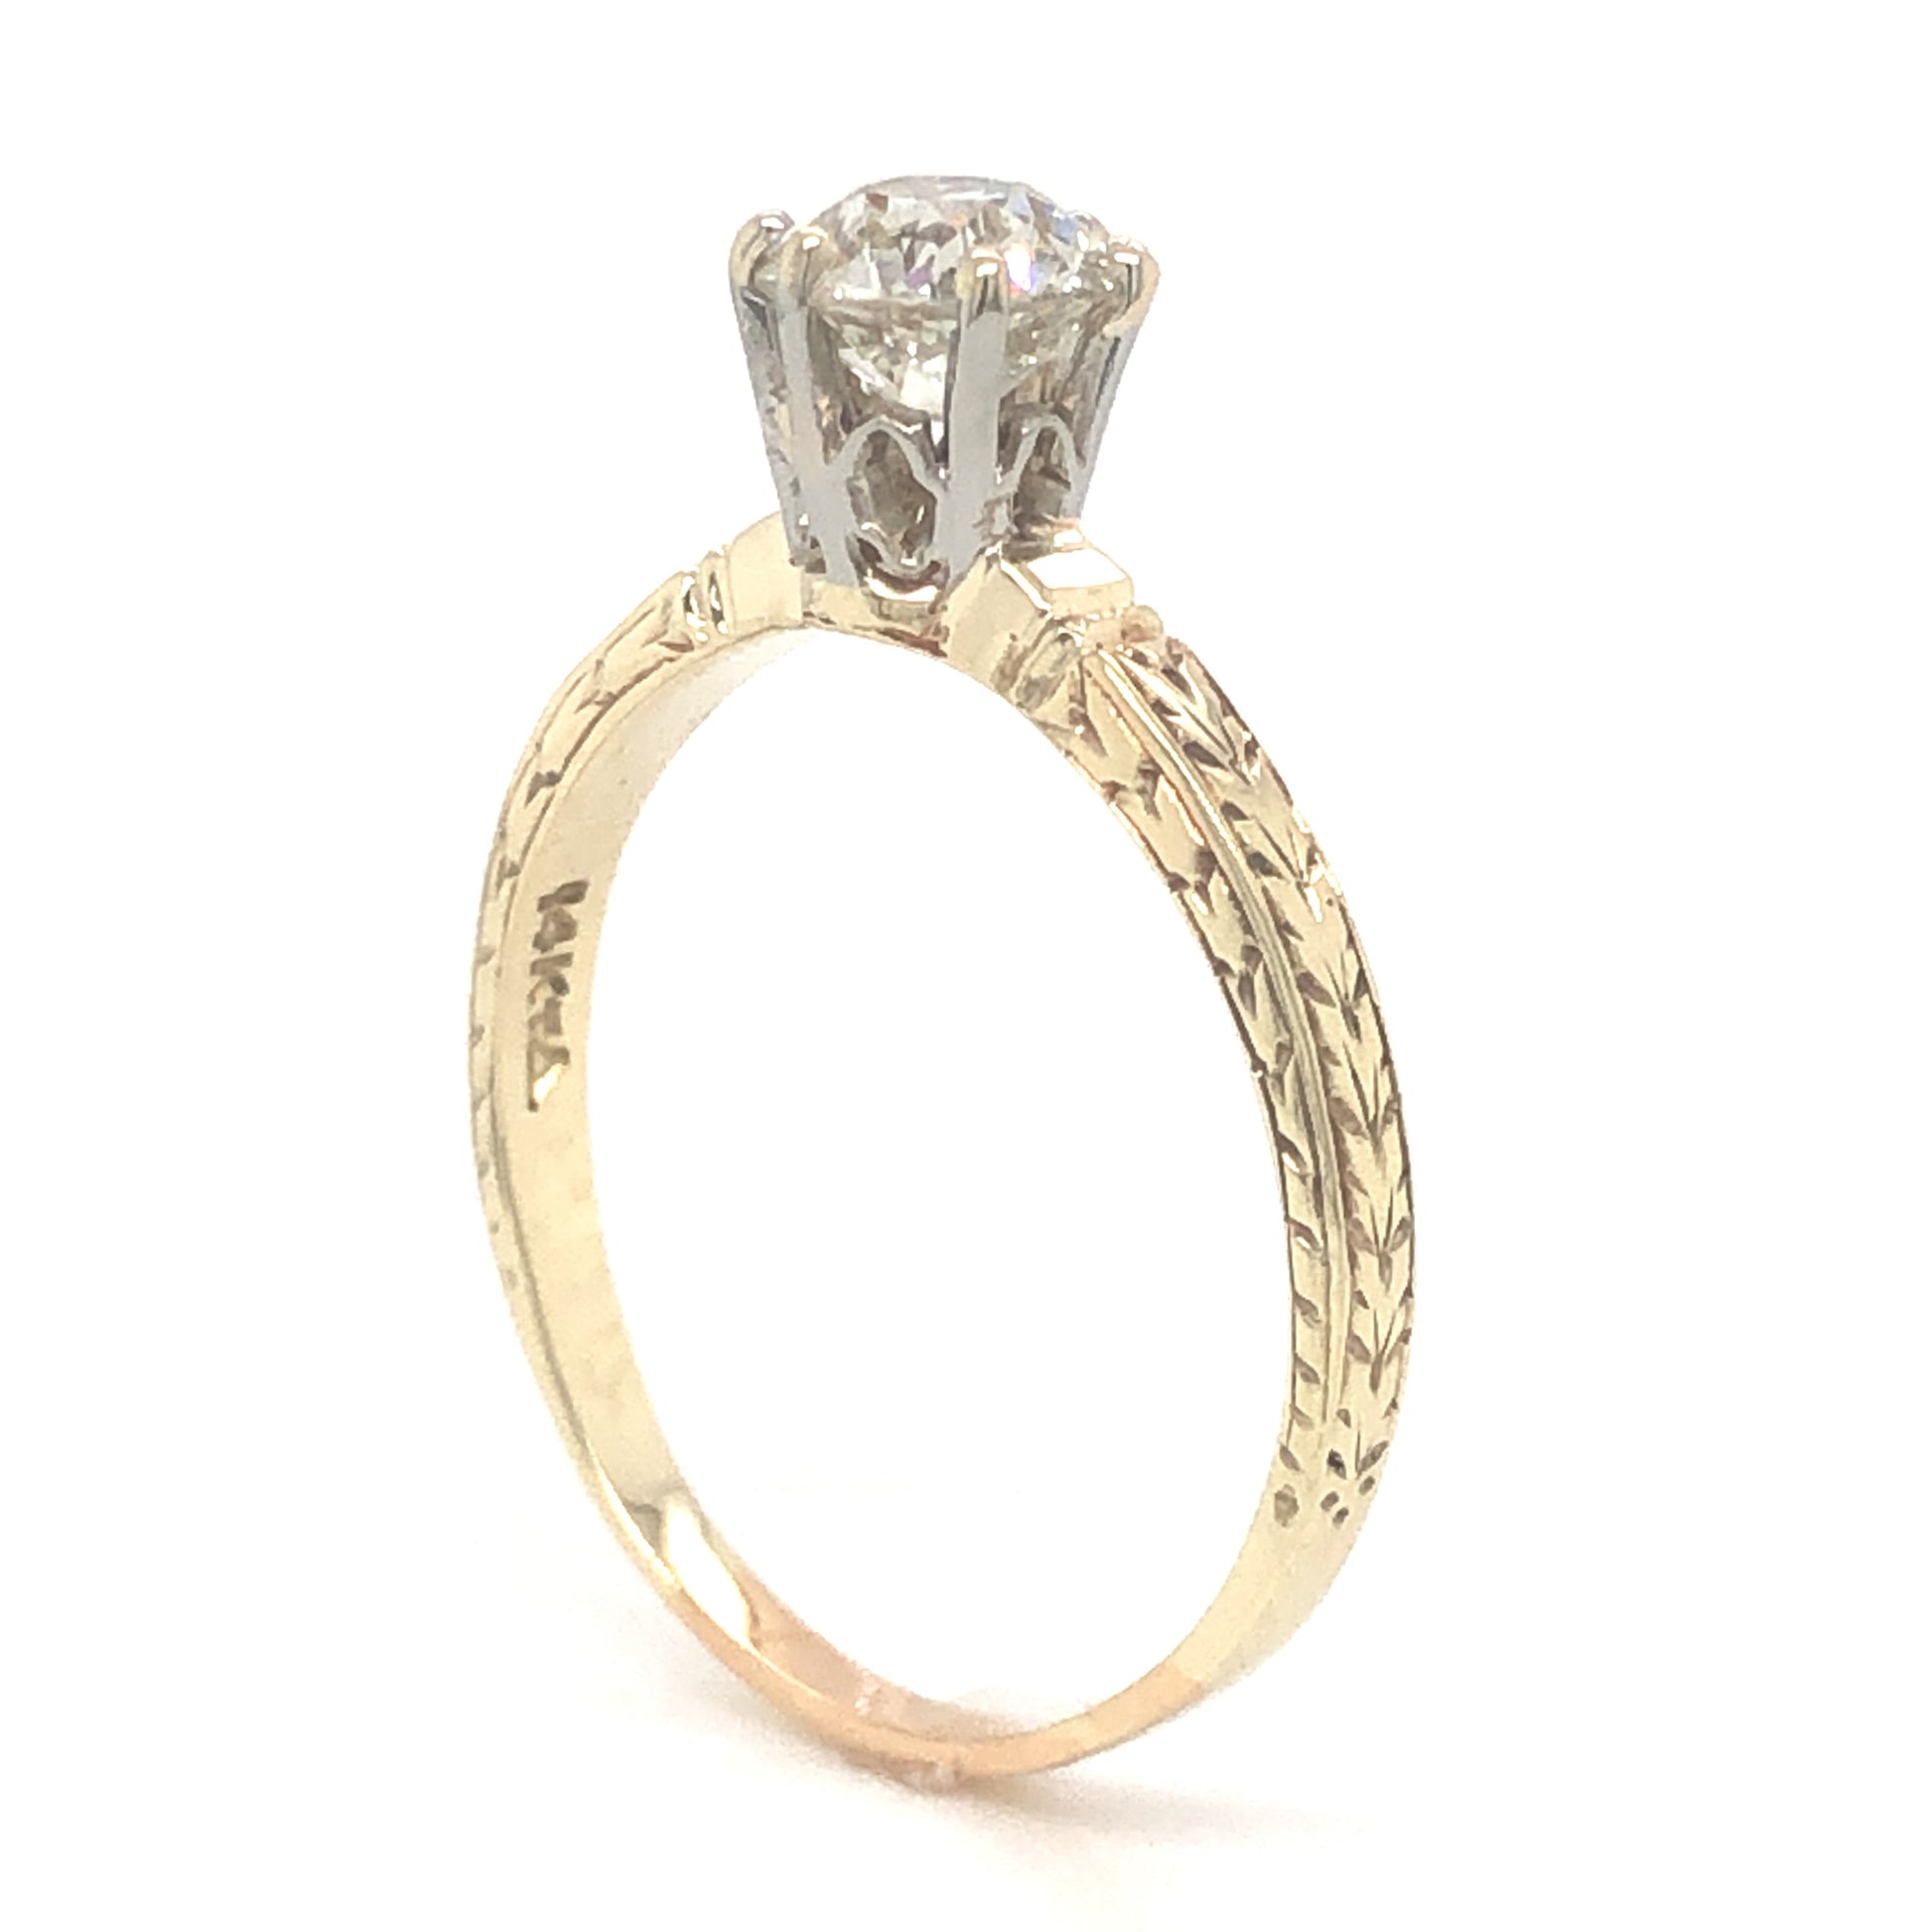 .77 Art Deco Solitaire Diamond Engagement Ring in 14k Yellow GoldComposition: Platinum Ring Size: 6.25 Total Diamond Weight: .77ct Total Gram Weight: 2.08 g Inscription: 14k
      